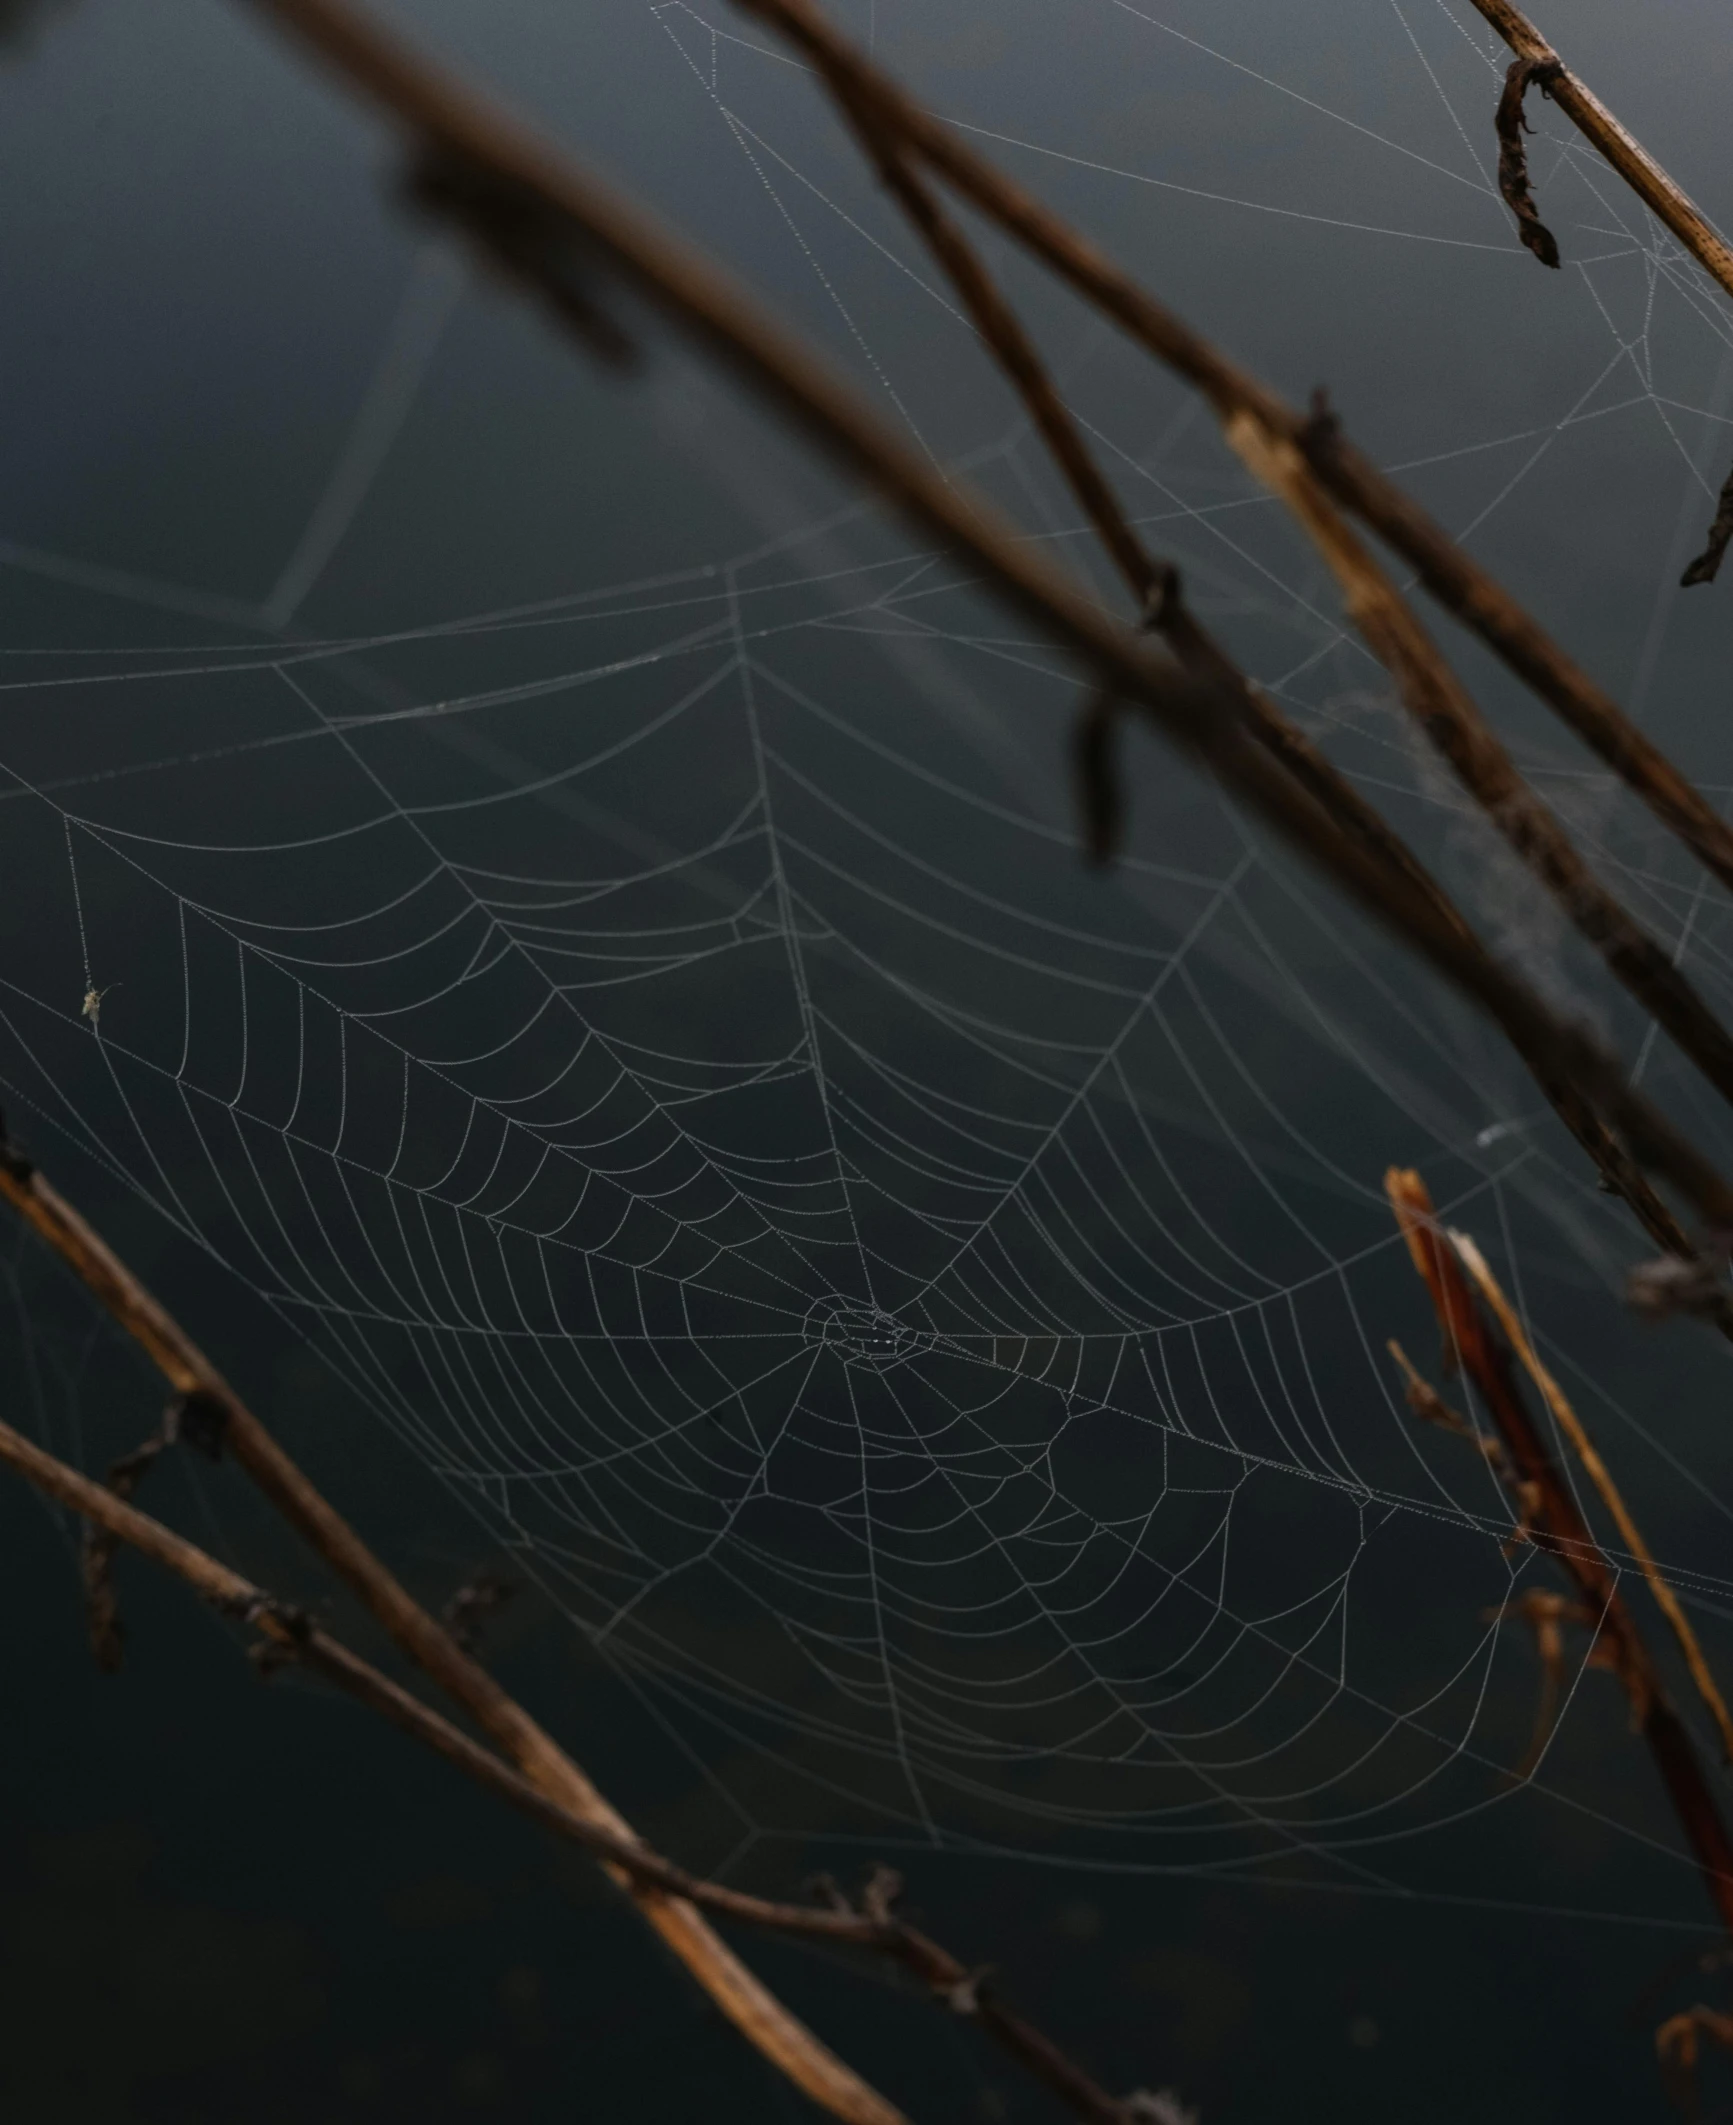 a web hanging over some water near a tree